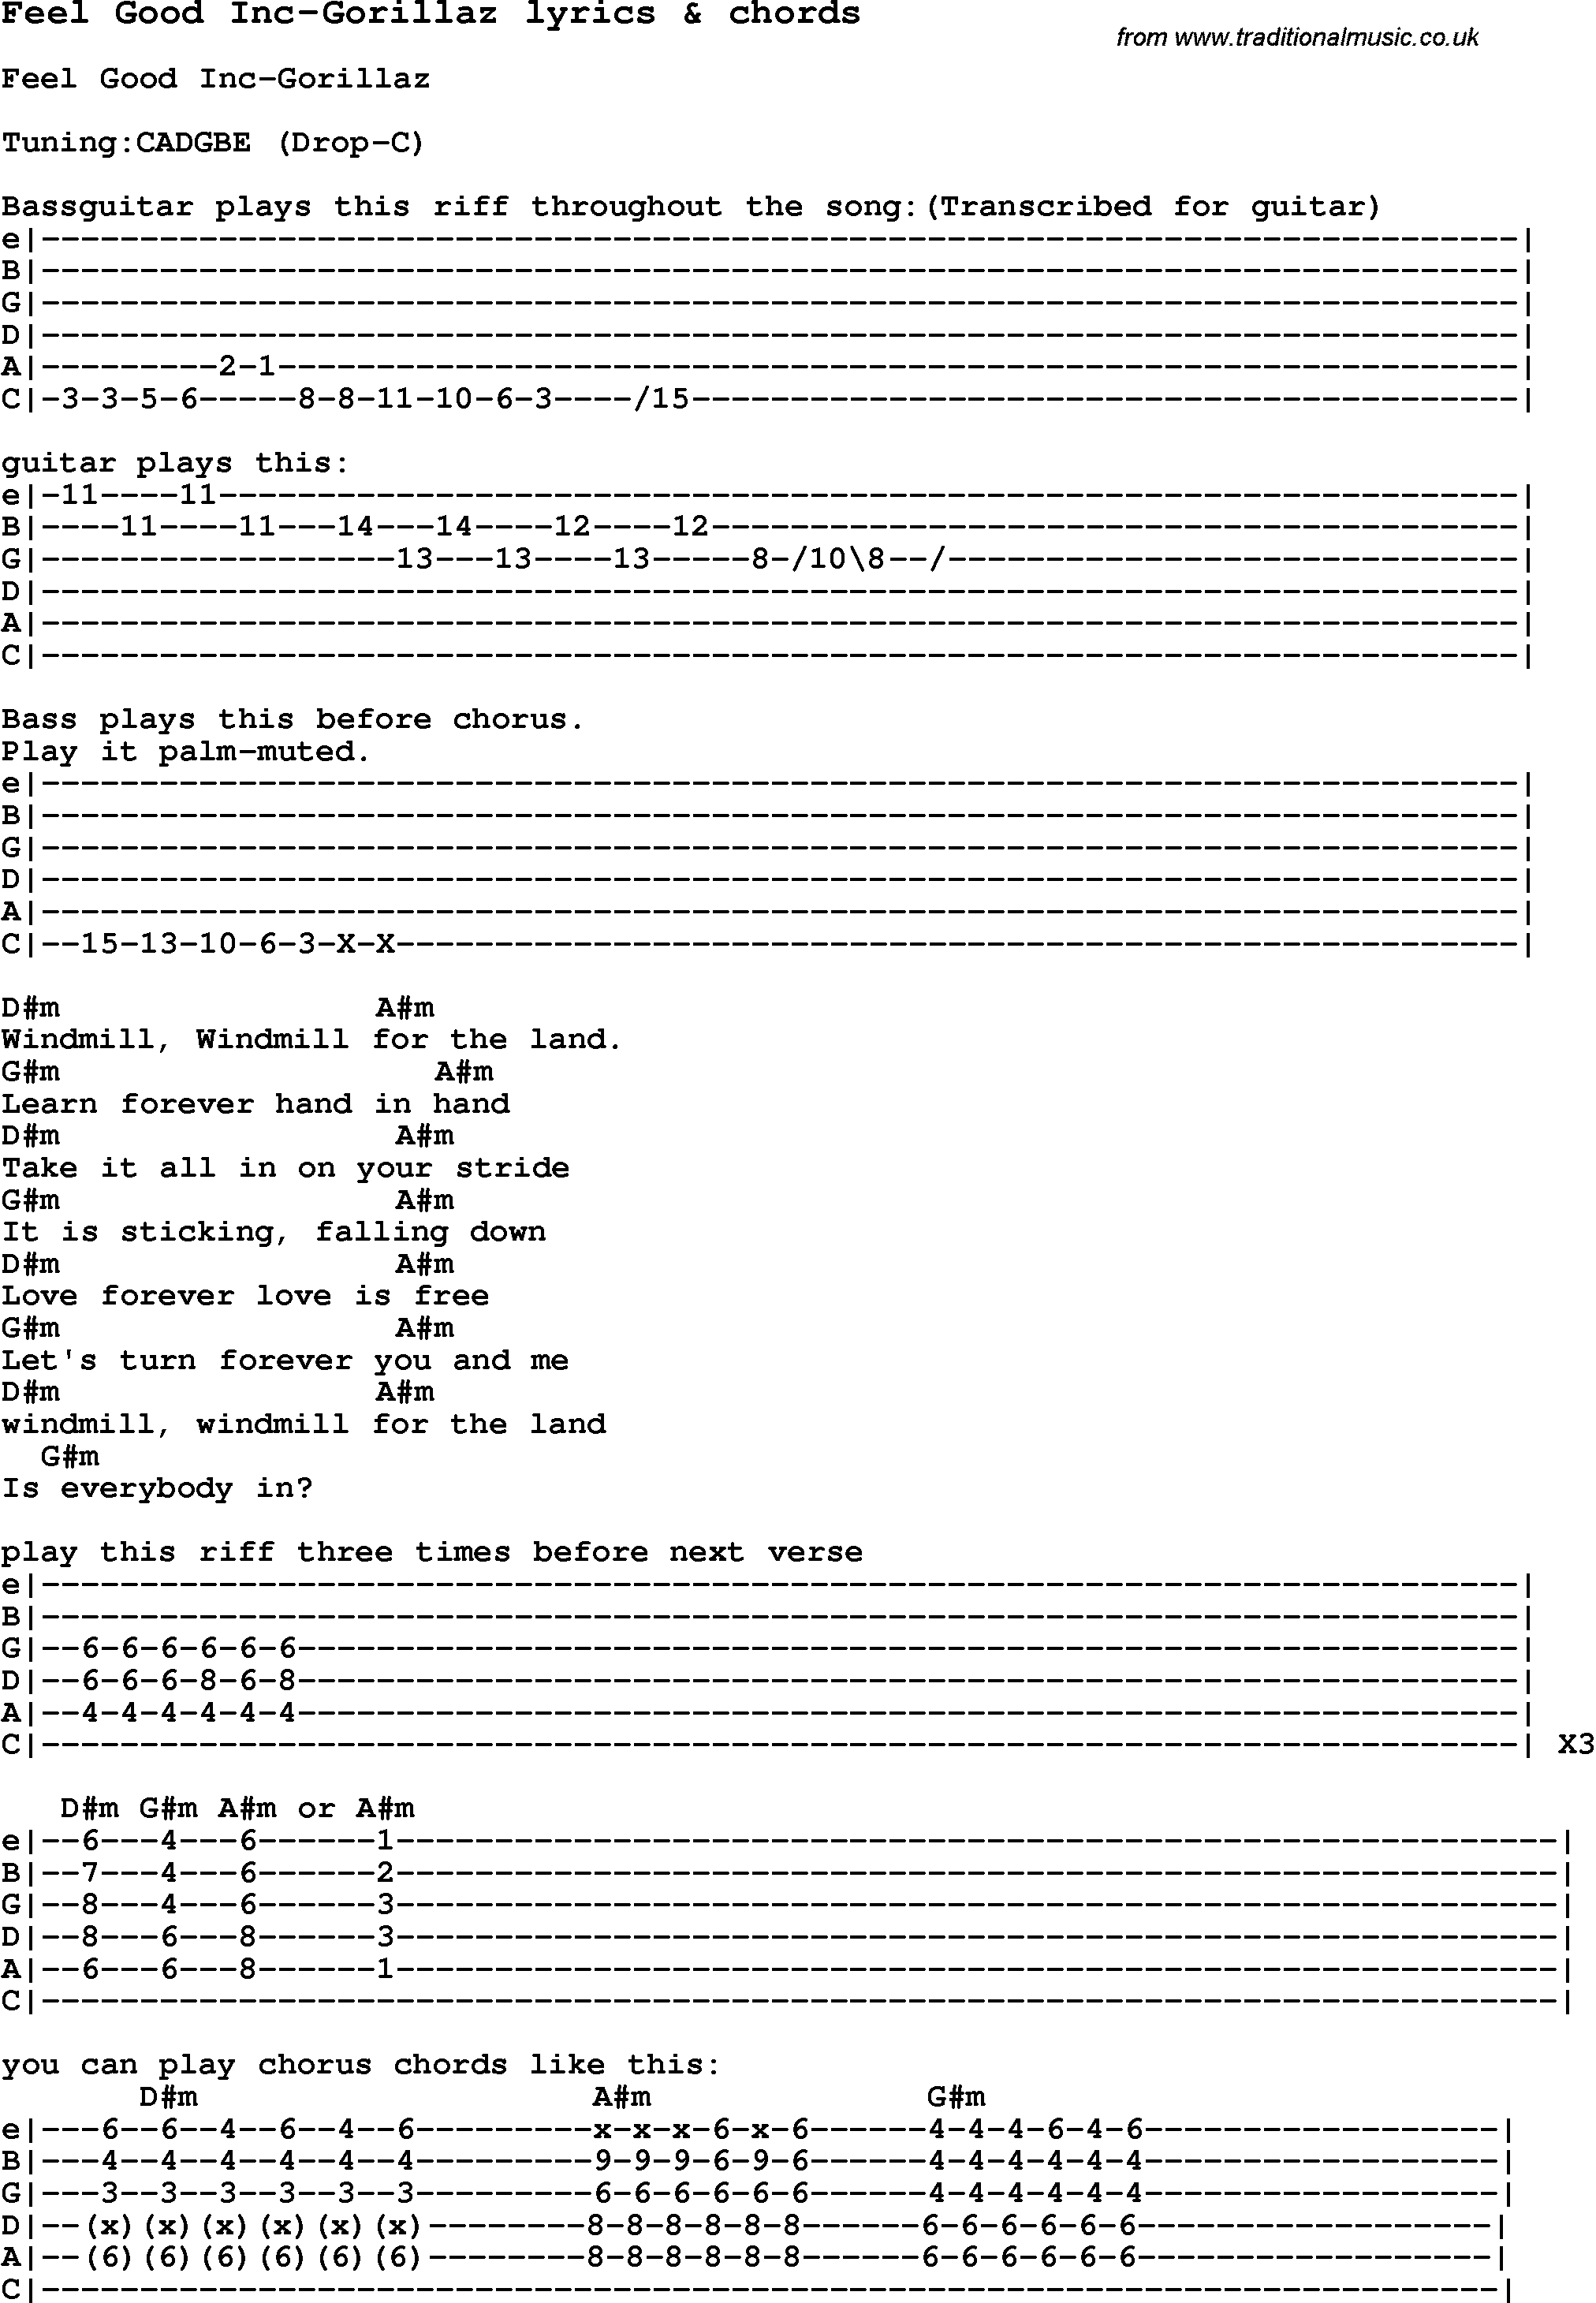 Feel Good Inc Guitar Chords Sheet And Chords Collection